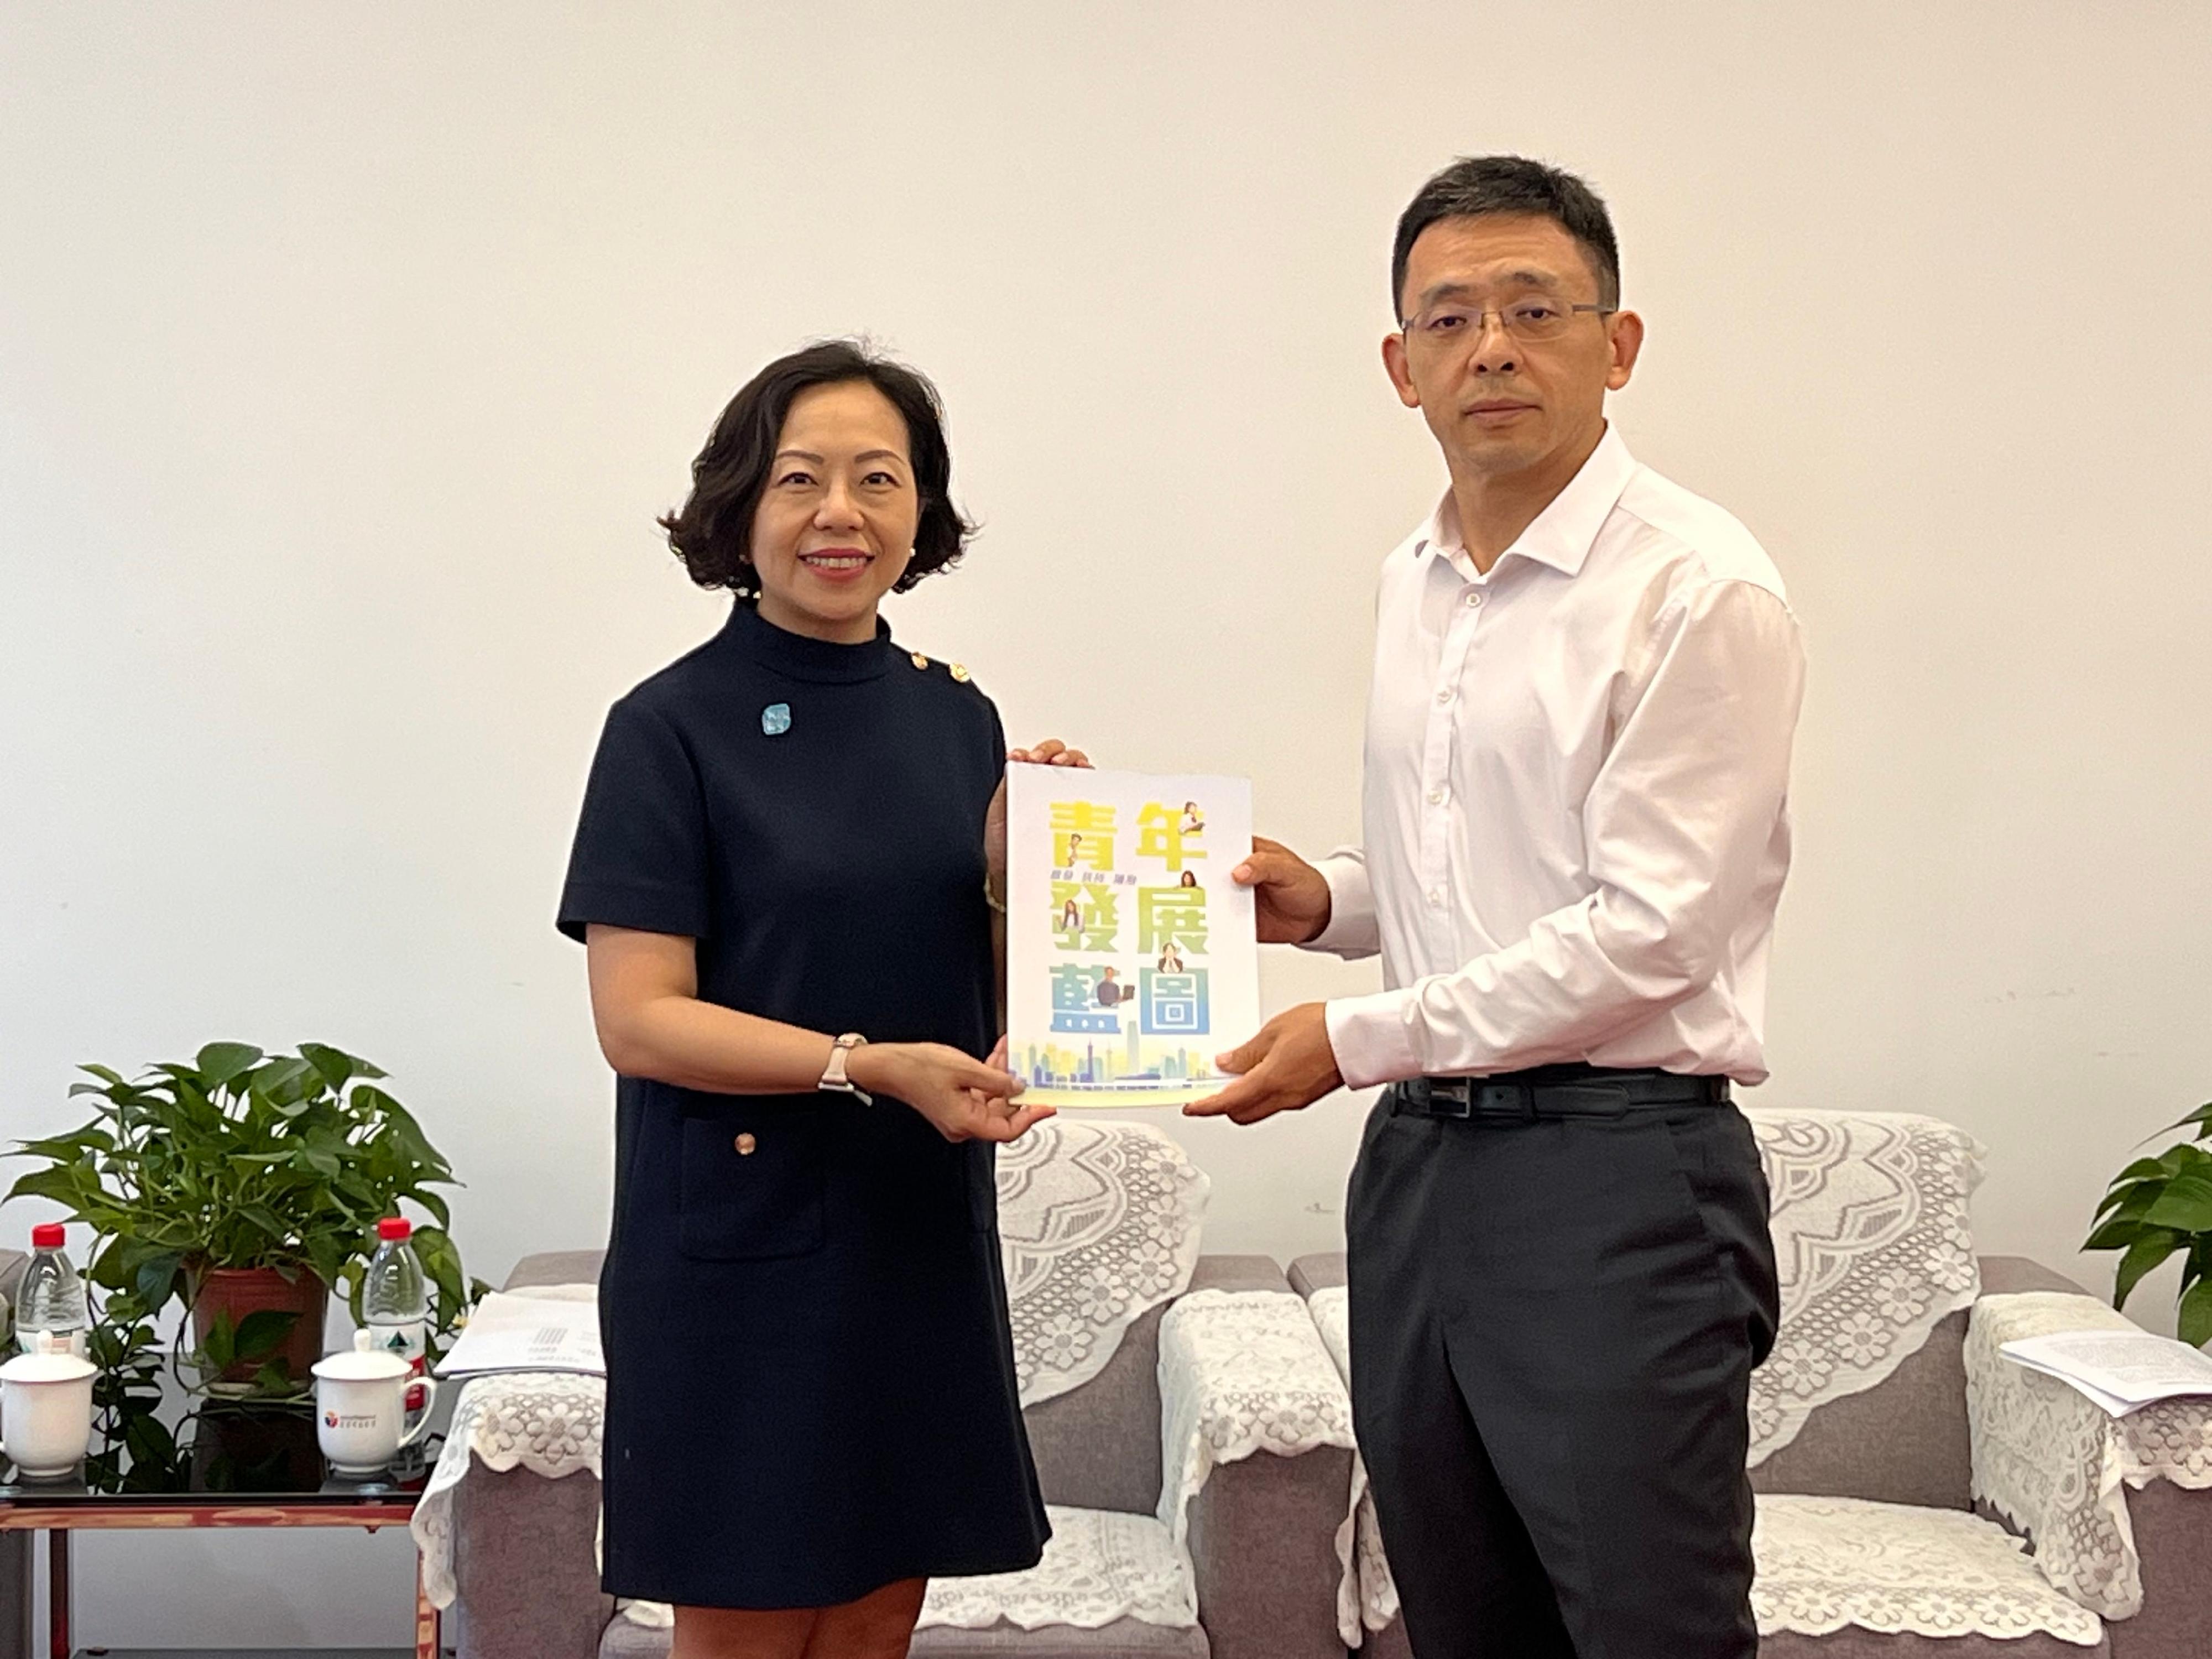 The Secretary for Home and Youth Affairs, Miss Alice Mak, continued her visit in Beijing today (July 18). Photo shows Miss Mak (left) meeting with the honorary president of the Beijing Youth Federation, Mr Zheng Xiaobo.
